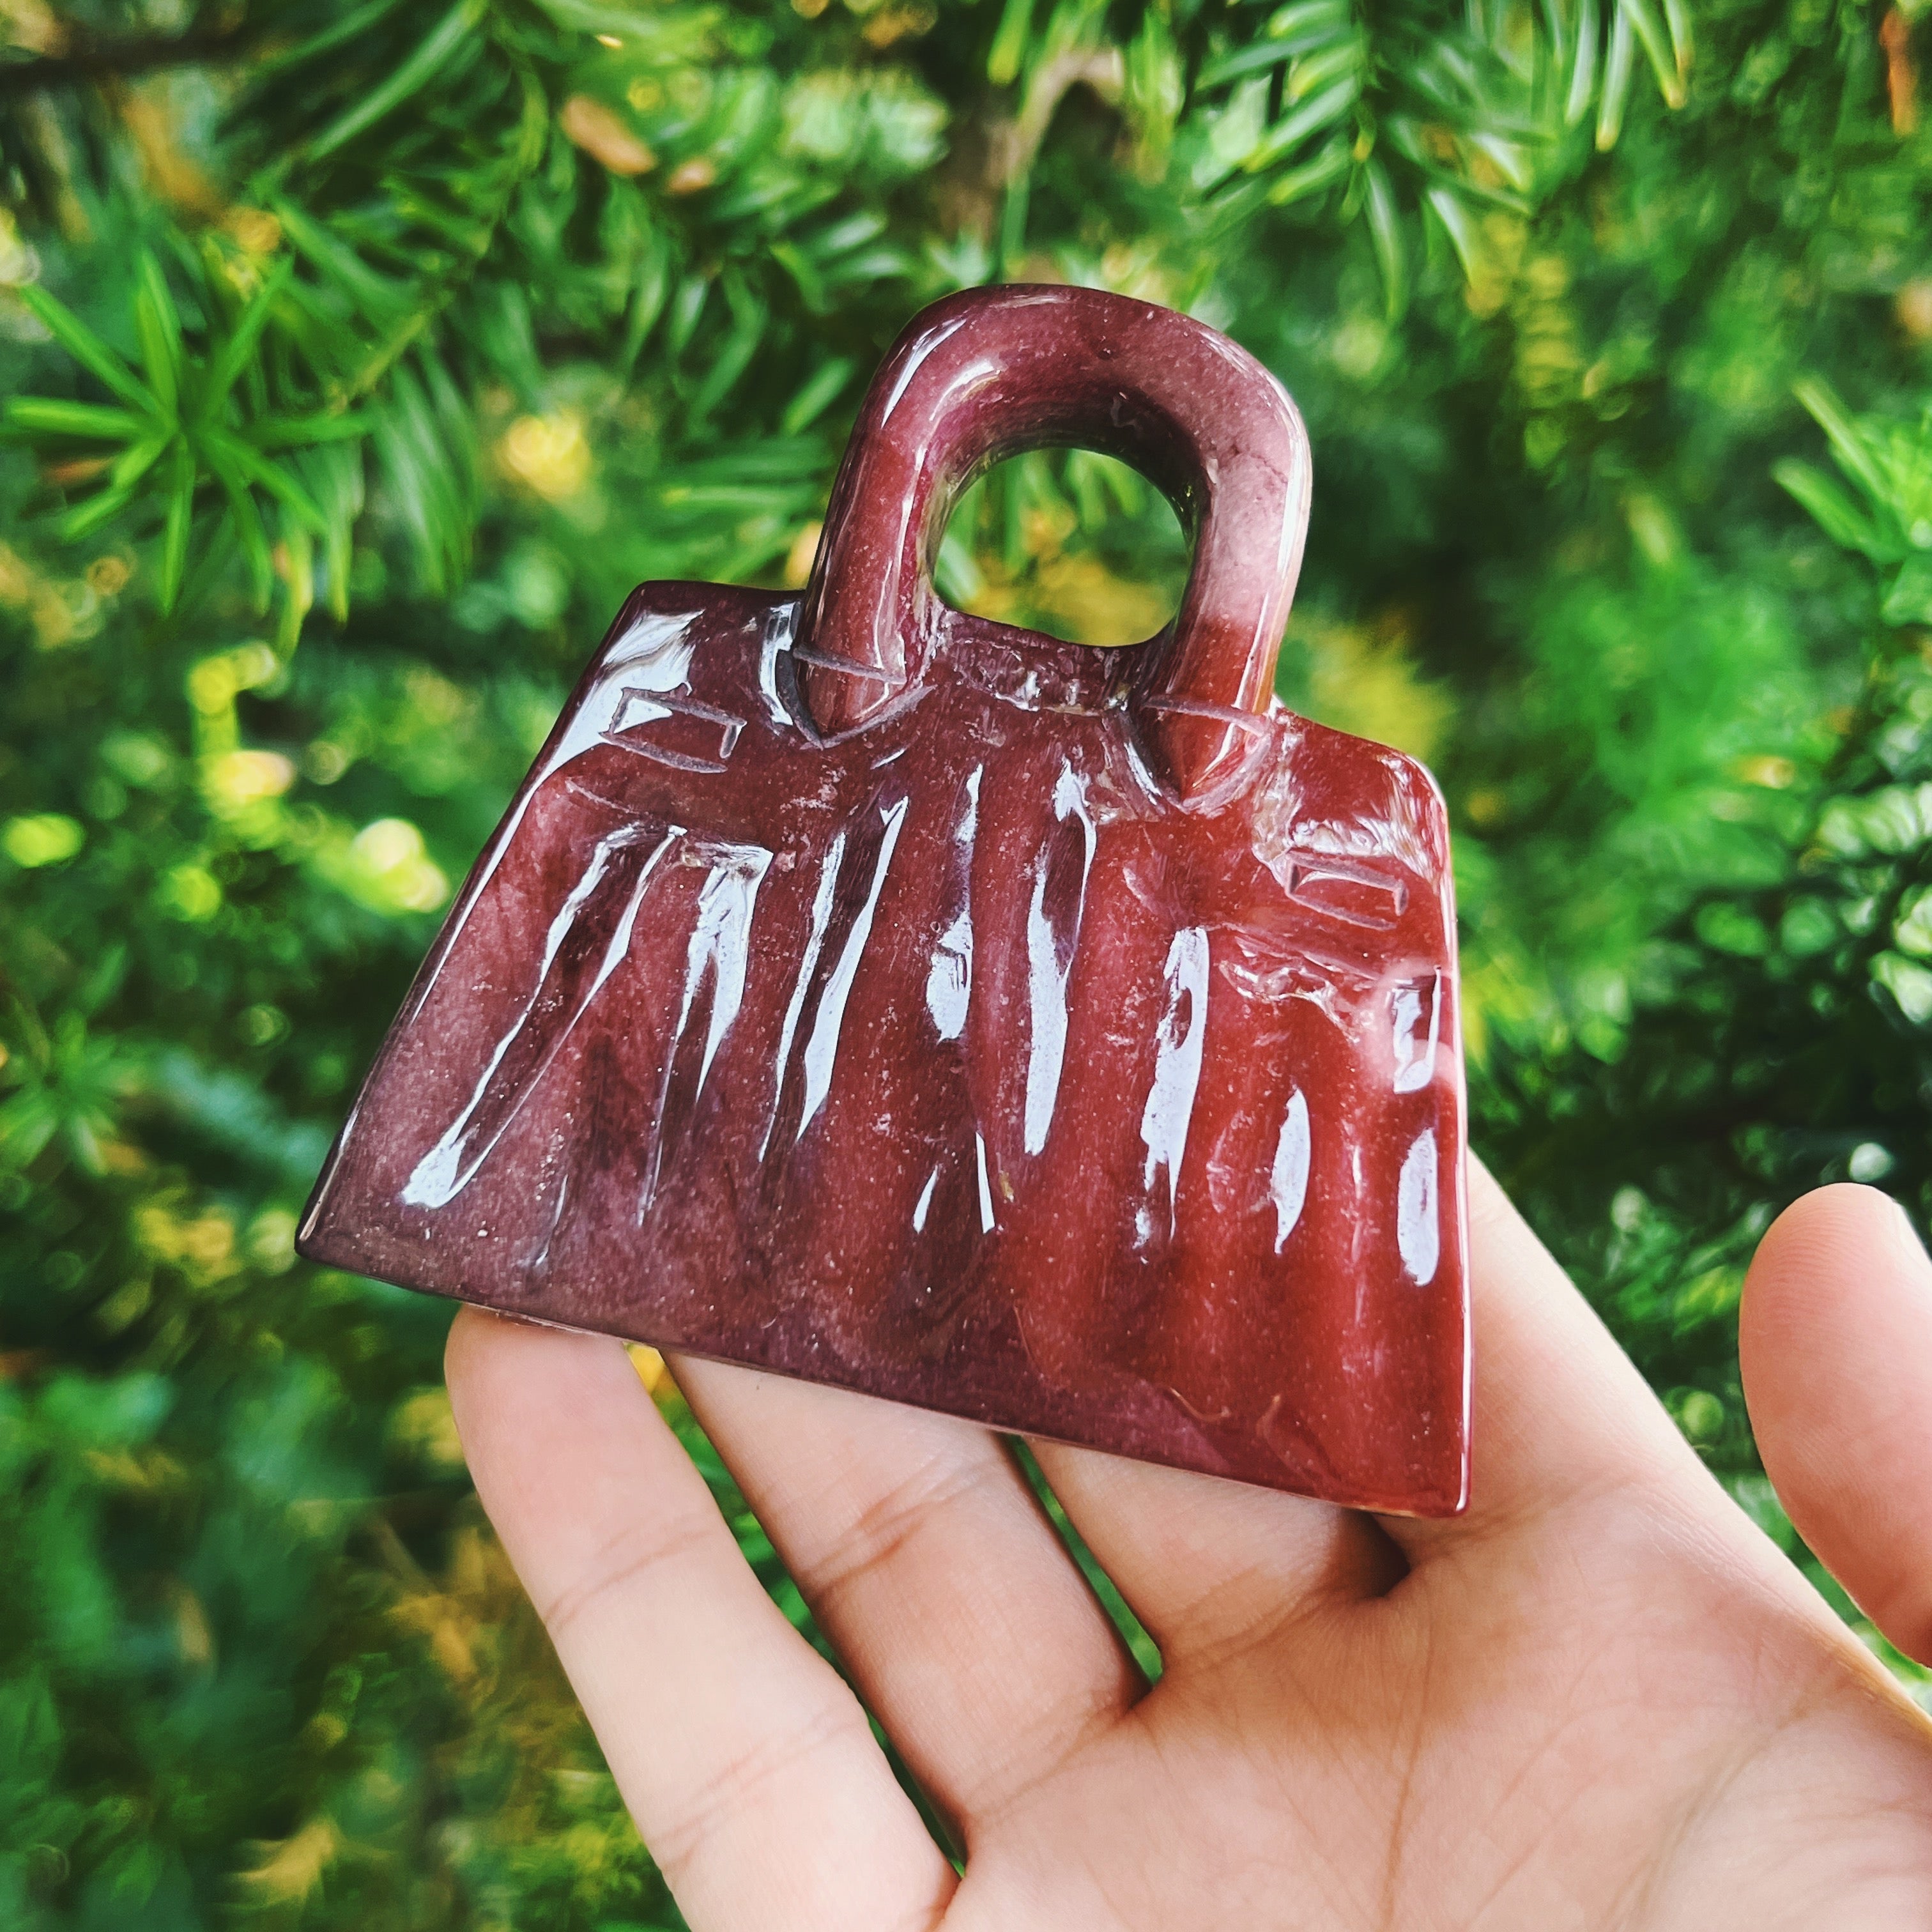 Mookaite Purse Carving